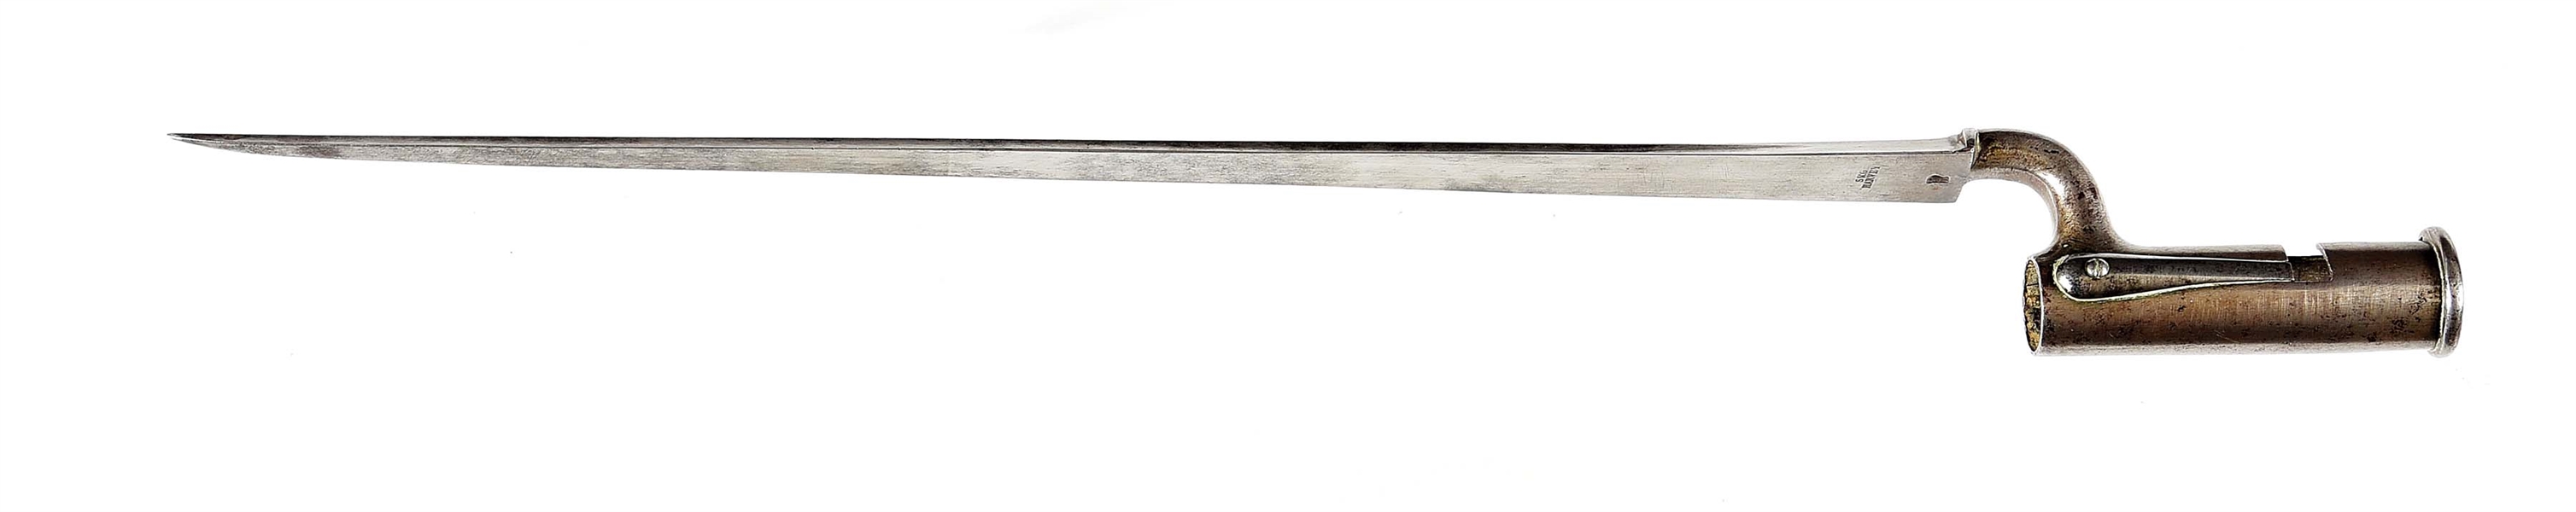 RARE LAND PATTERN BAYONET WITH SPRING CATCH, C. 1768.